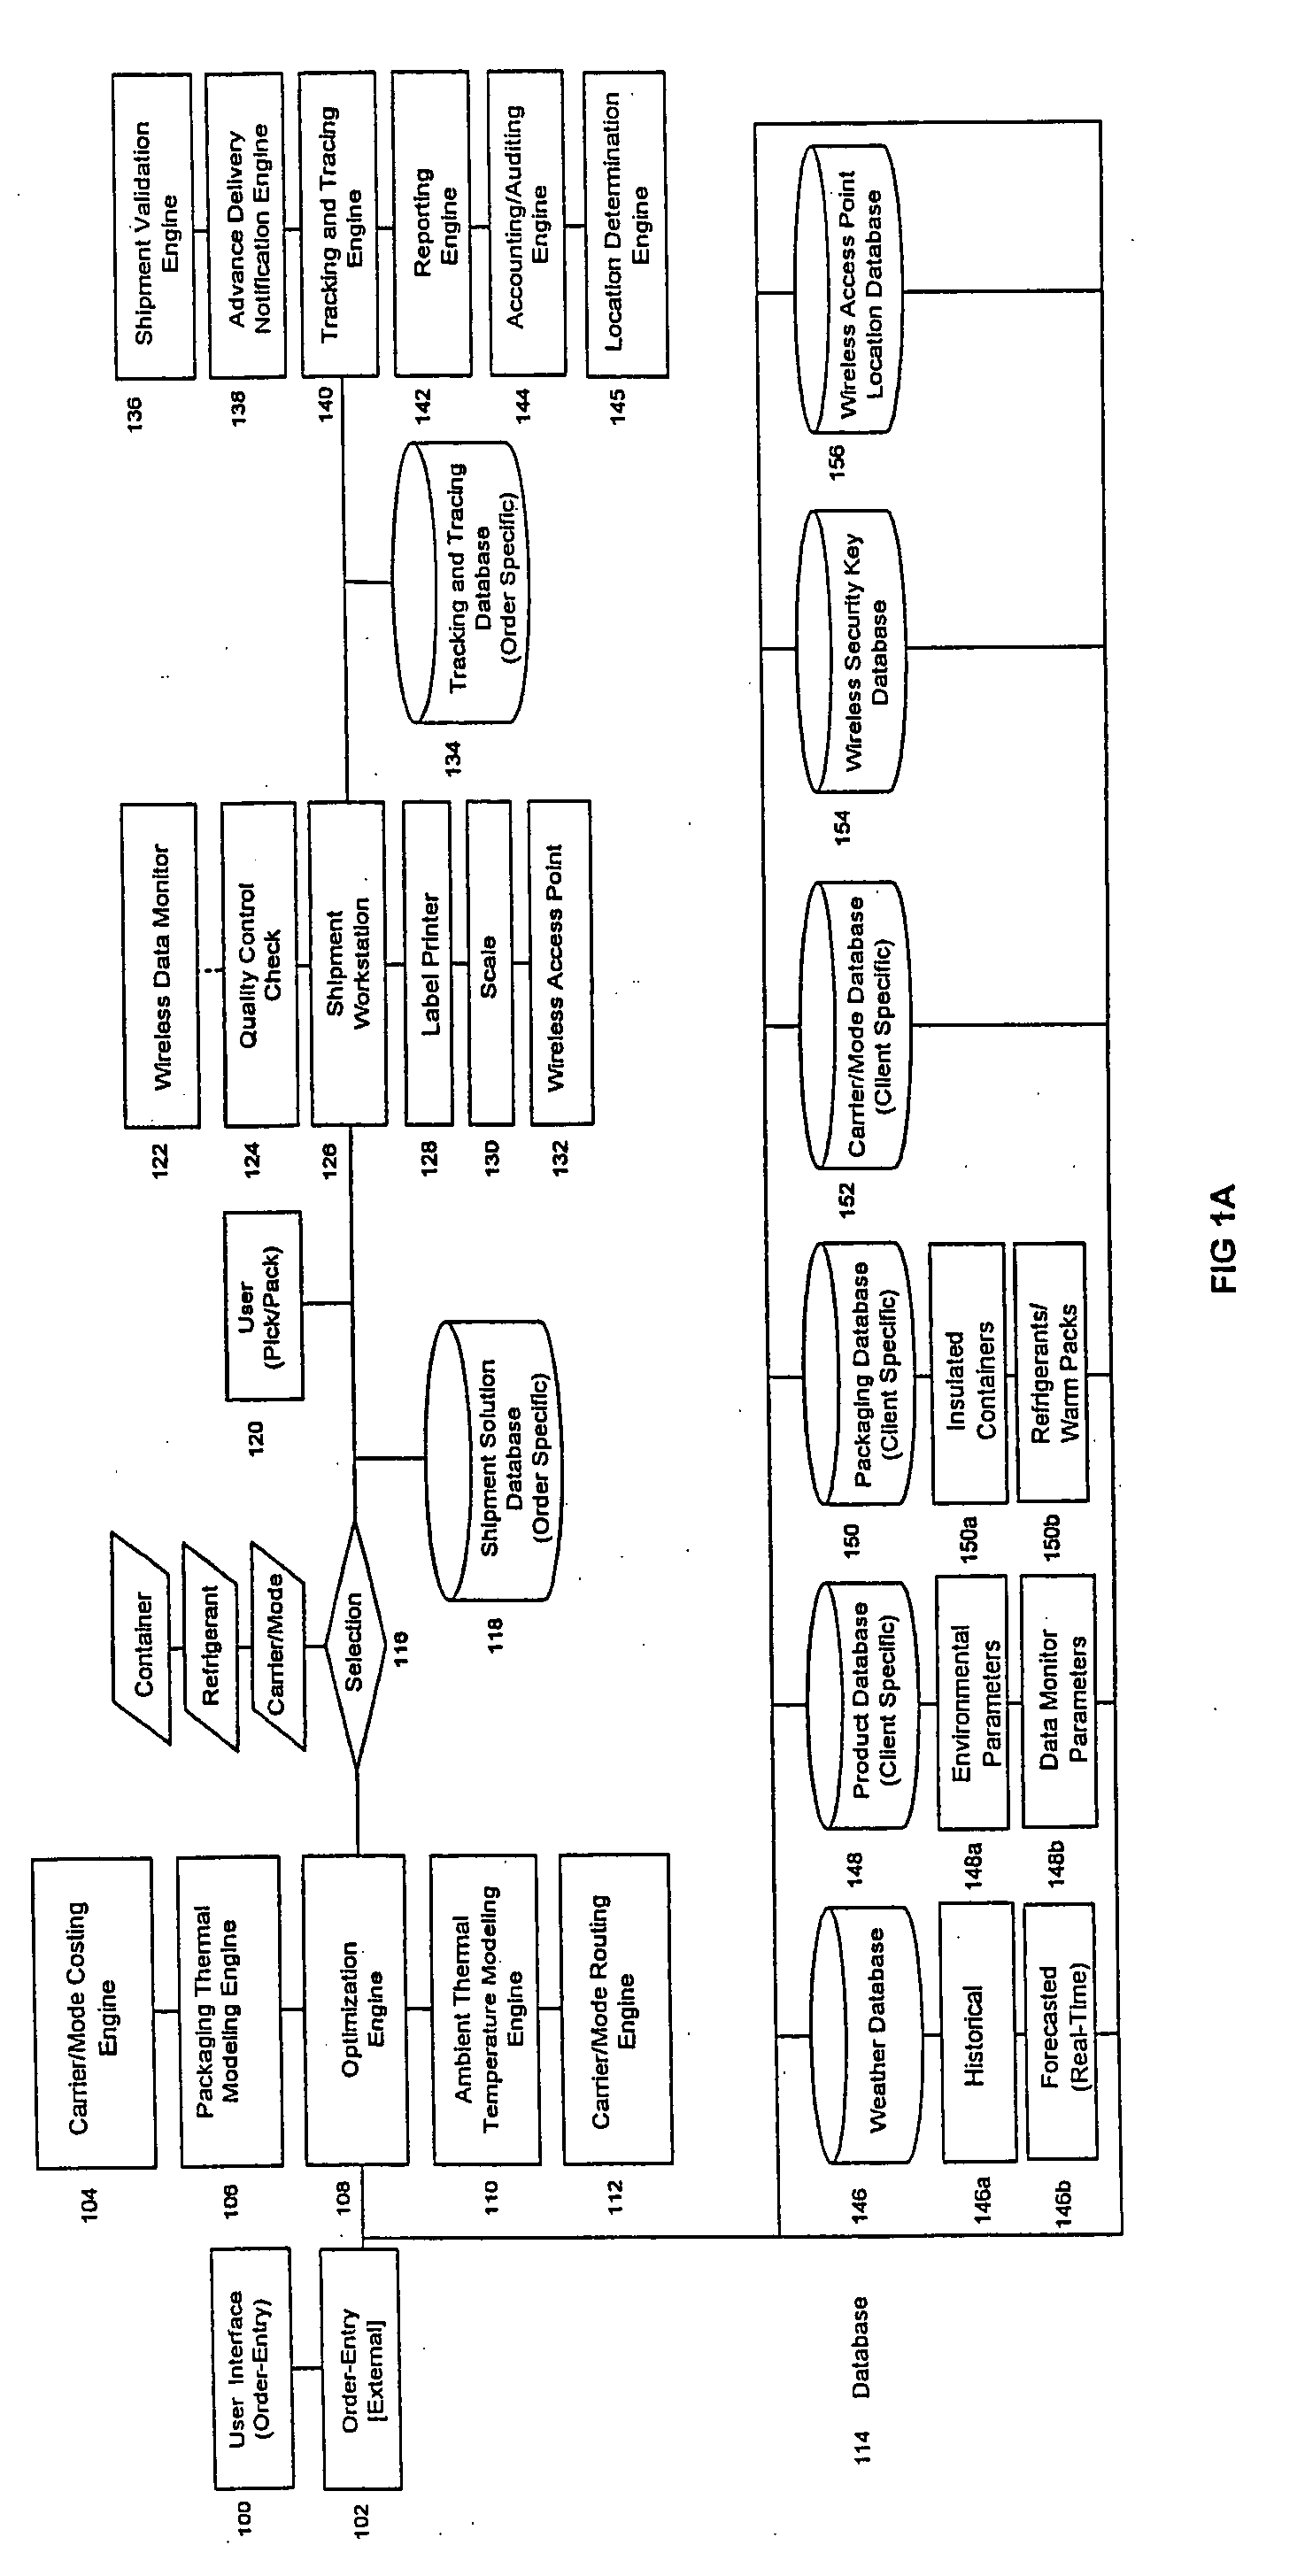 System and method for optimization of and analysis of insulated systems